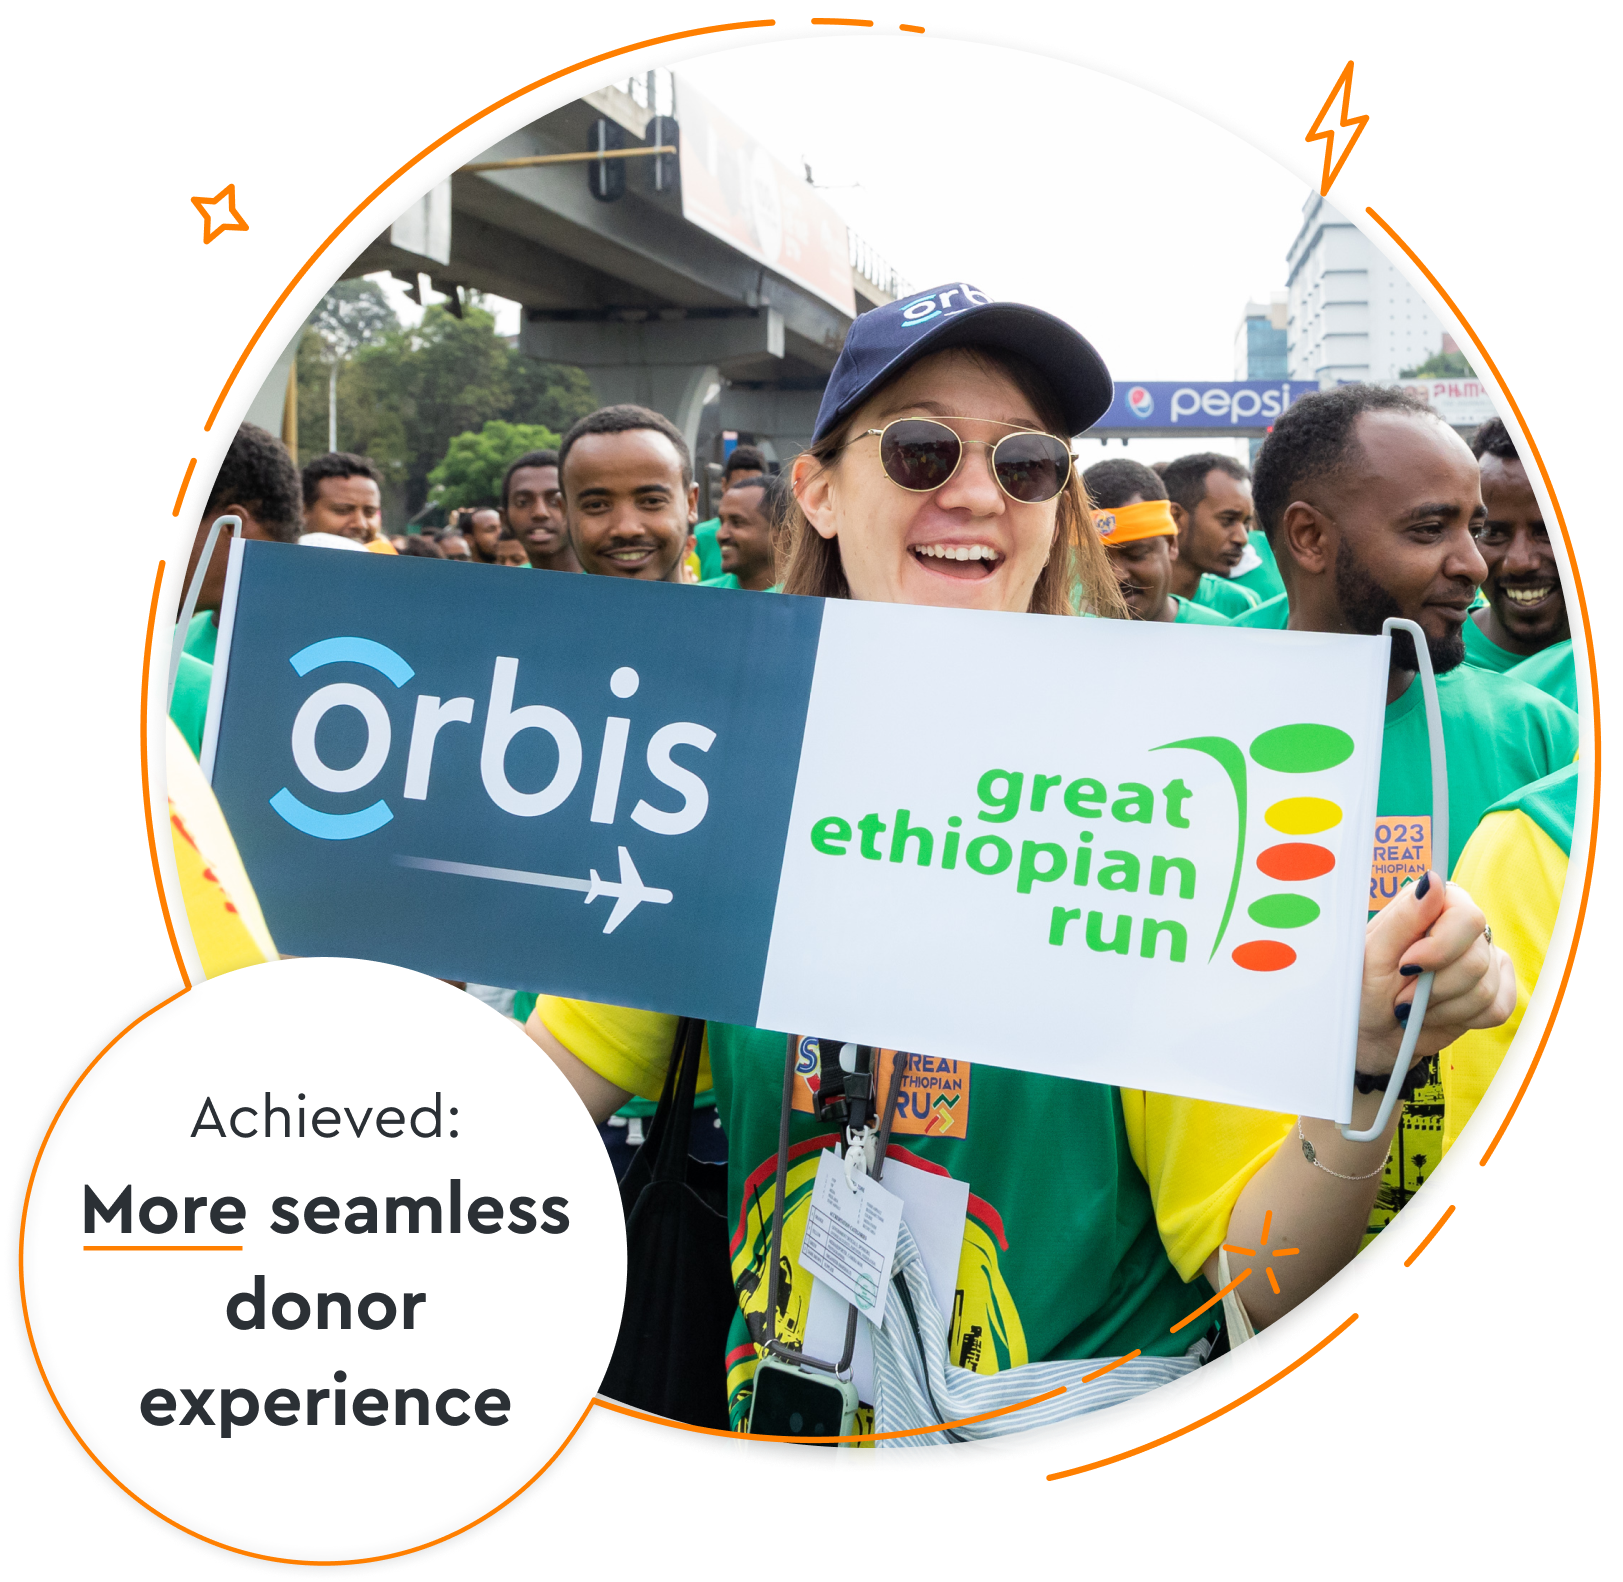 Orbis Ireland achieved a more seamless donor experience